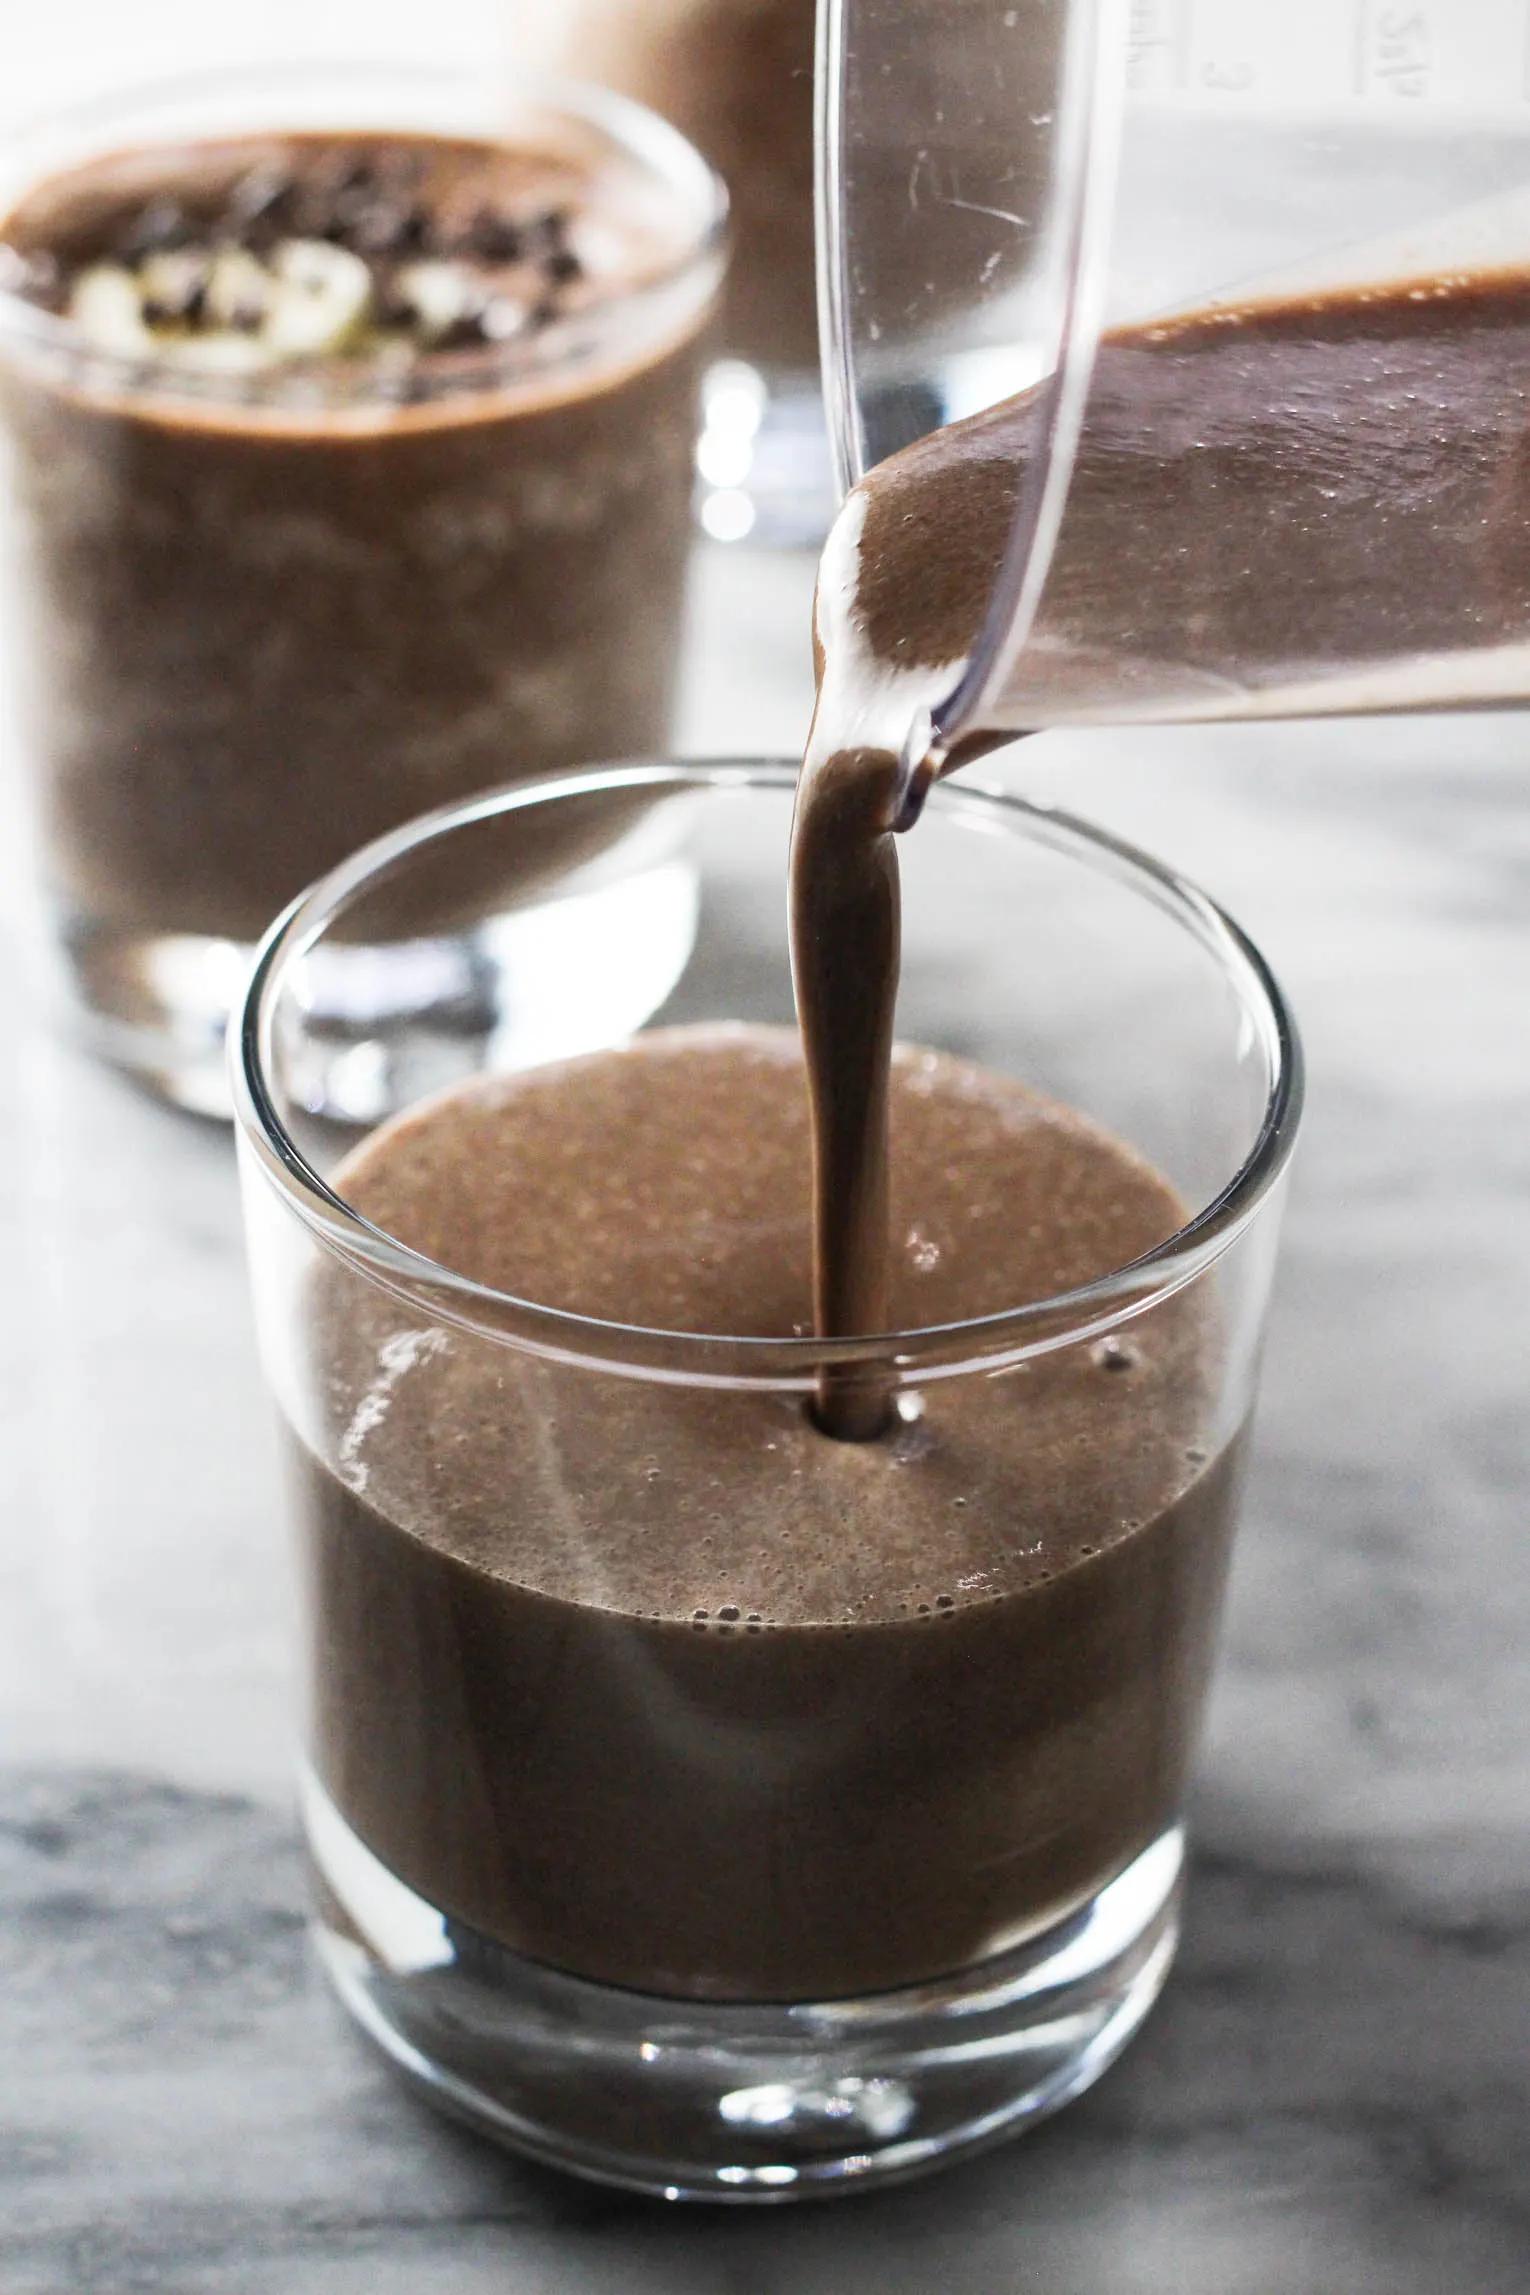 Chocolate banana smoothie being poured into a glass. Another glass in the background.